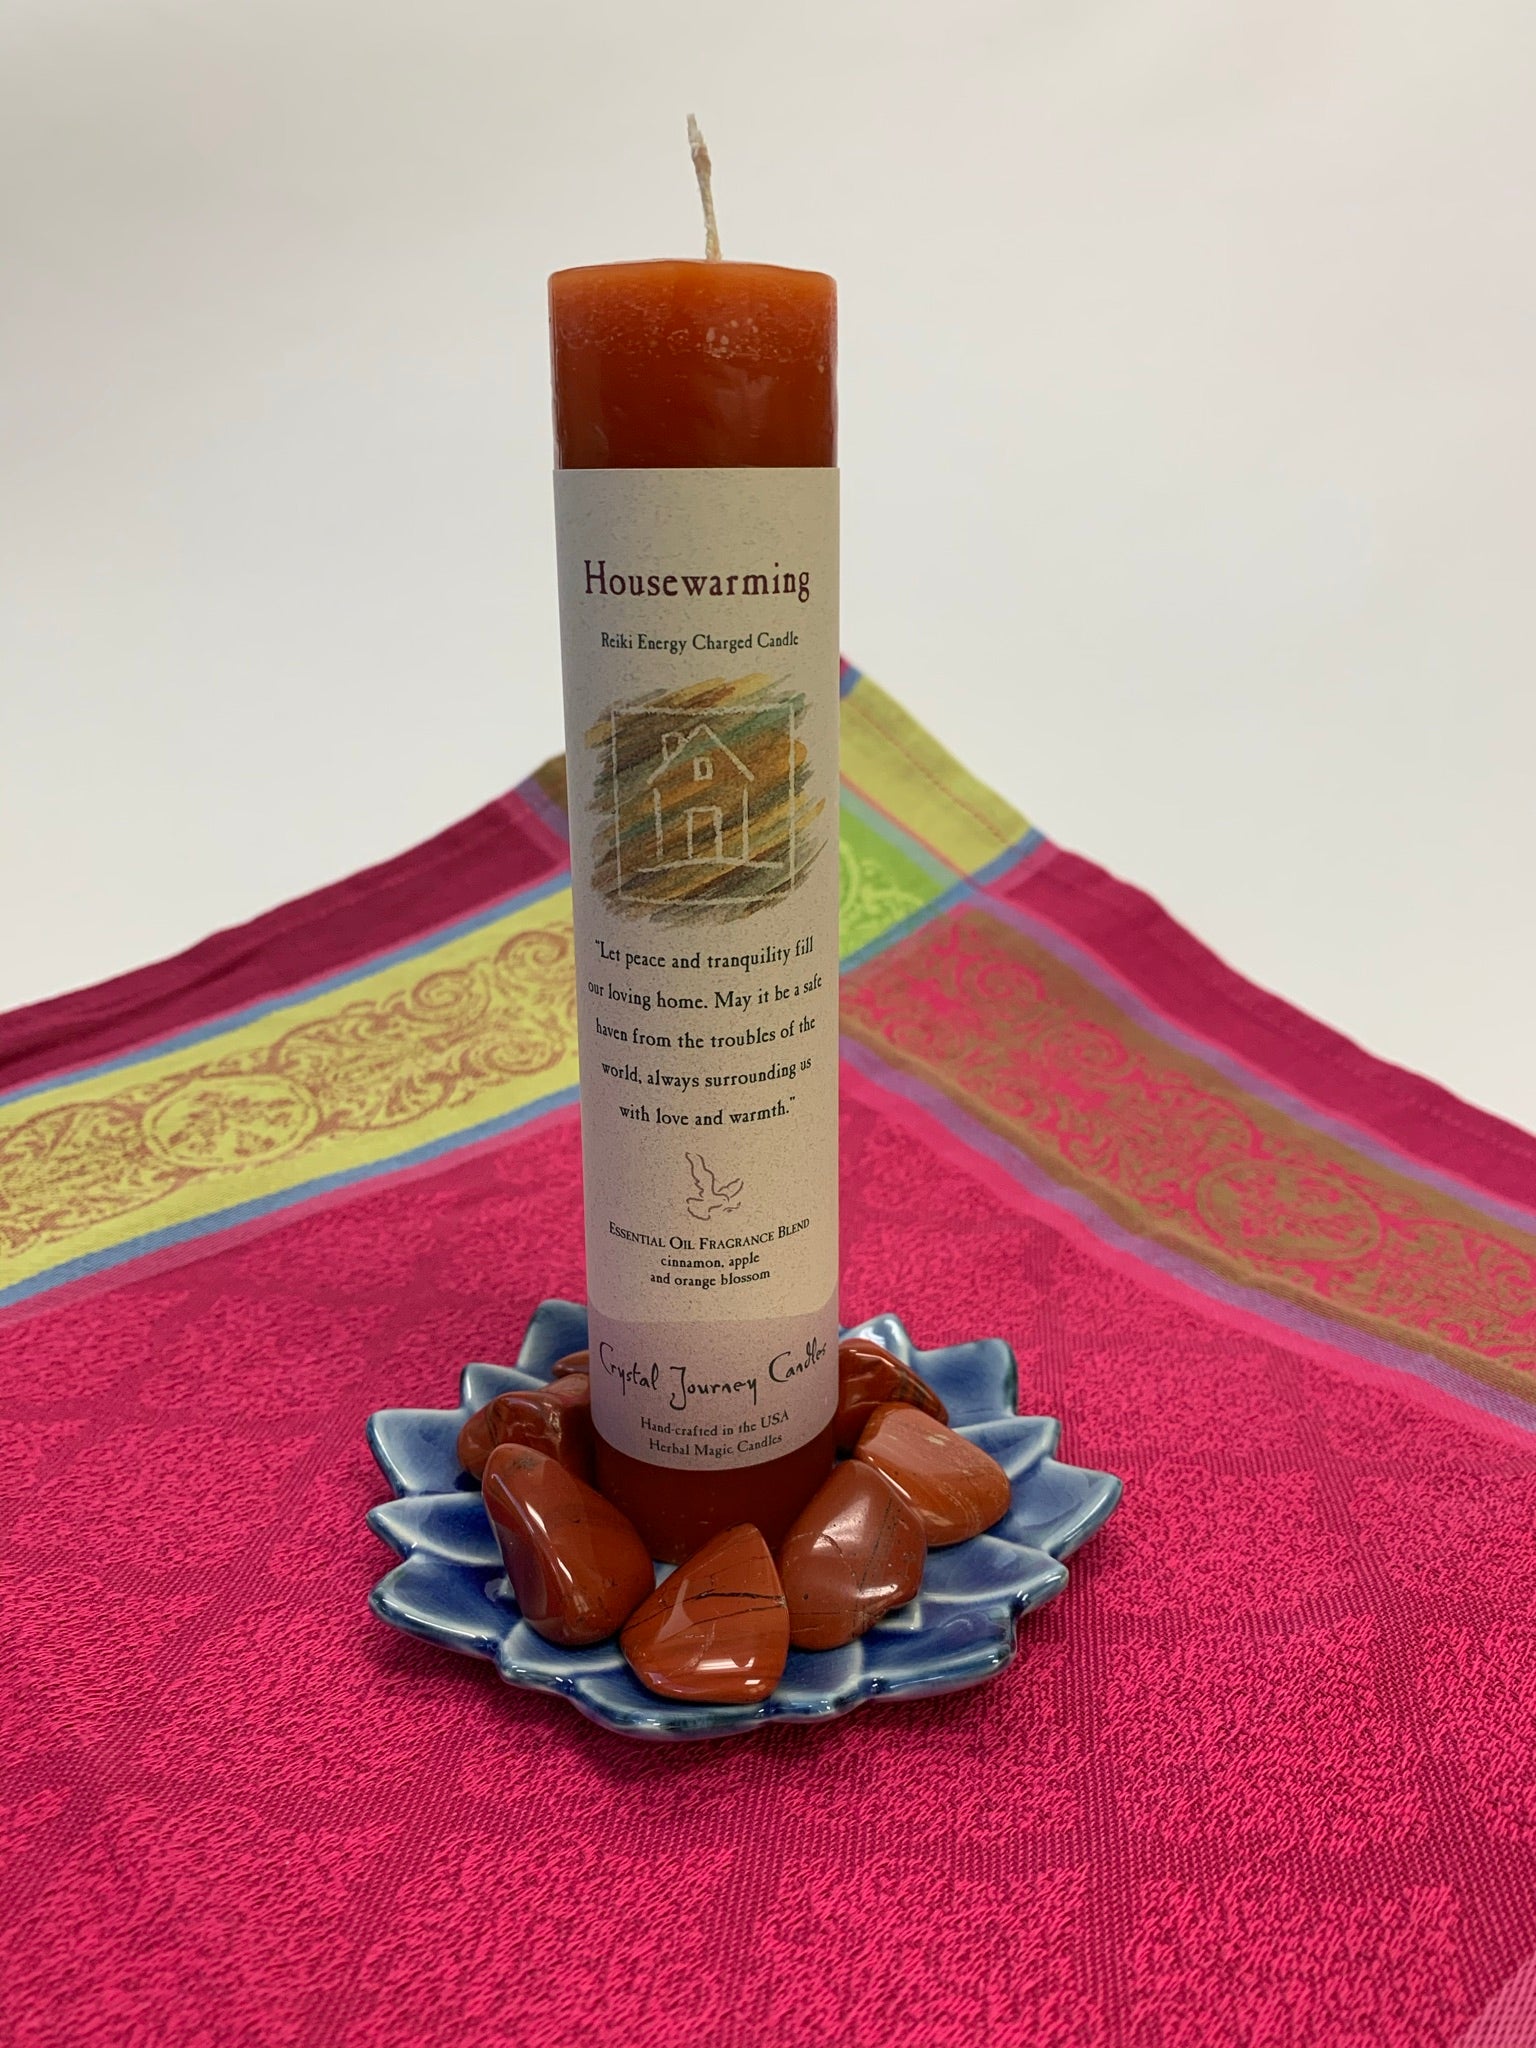 Reiki-charged pillar candle for "Housewarming" energy - bringing love, peace and warmth to any home. It is handcrafted and scented using essential oils. An affirmation/prayer is printed on the label, a well as a listing of the essential oils used (cinnamon, apple and orange blossom). It is approximately 7"x2½". Perfect for meditation, visualization or quiet time. This mahogany brown candle and its label are both visually appealing.